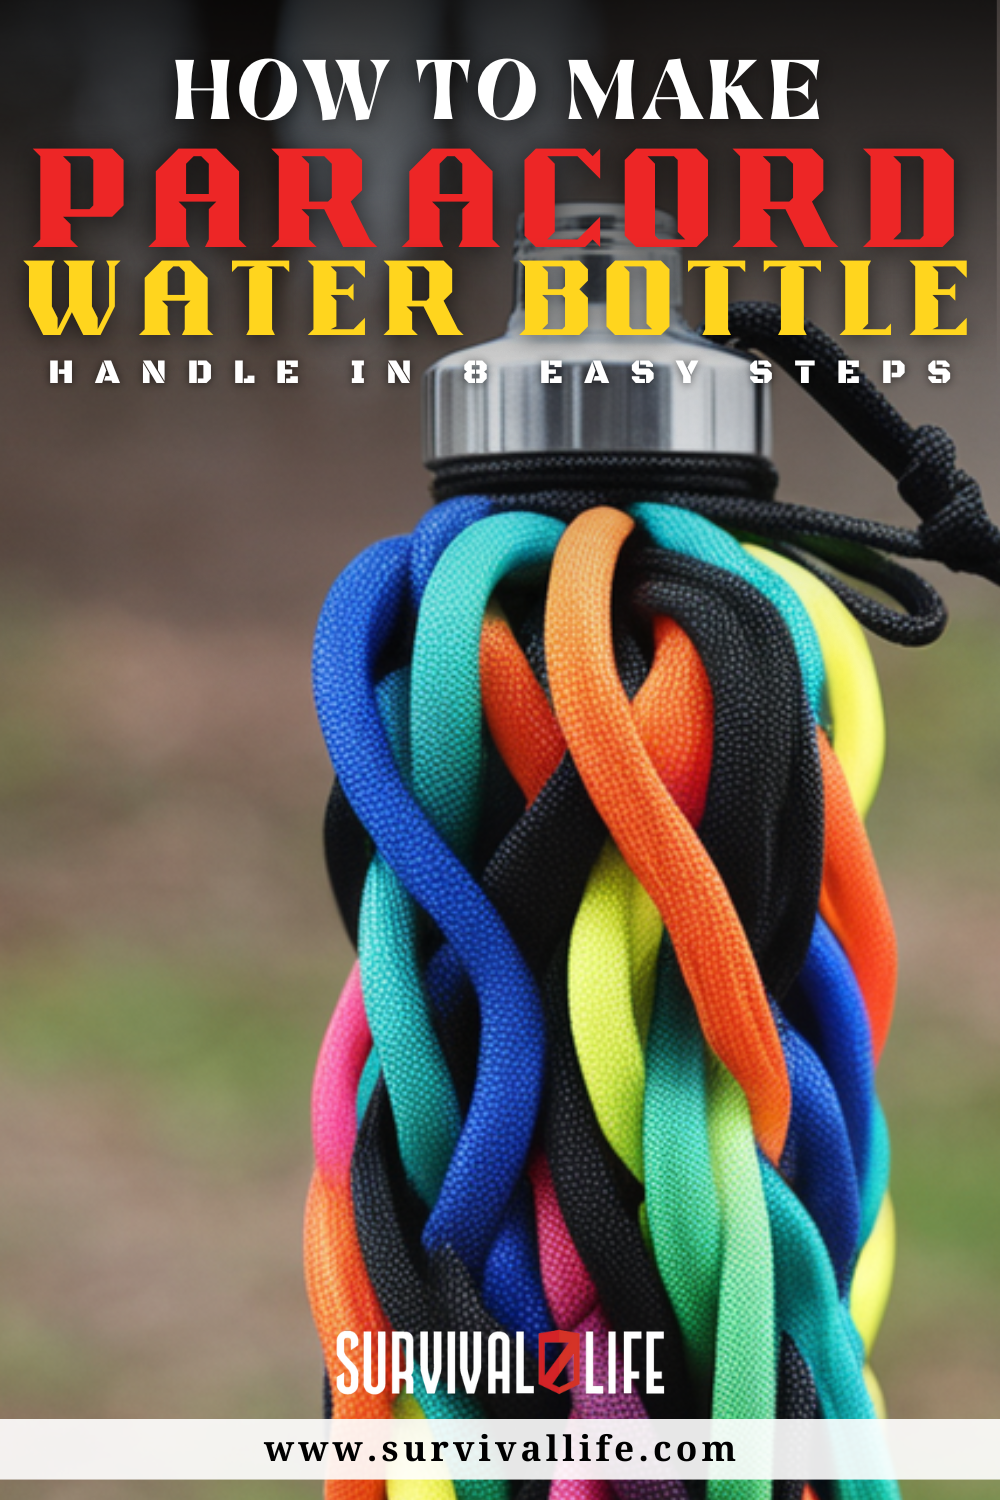 how to make a paracord water bottle handle